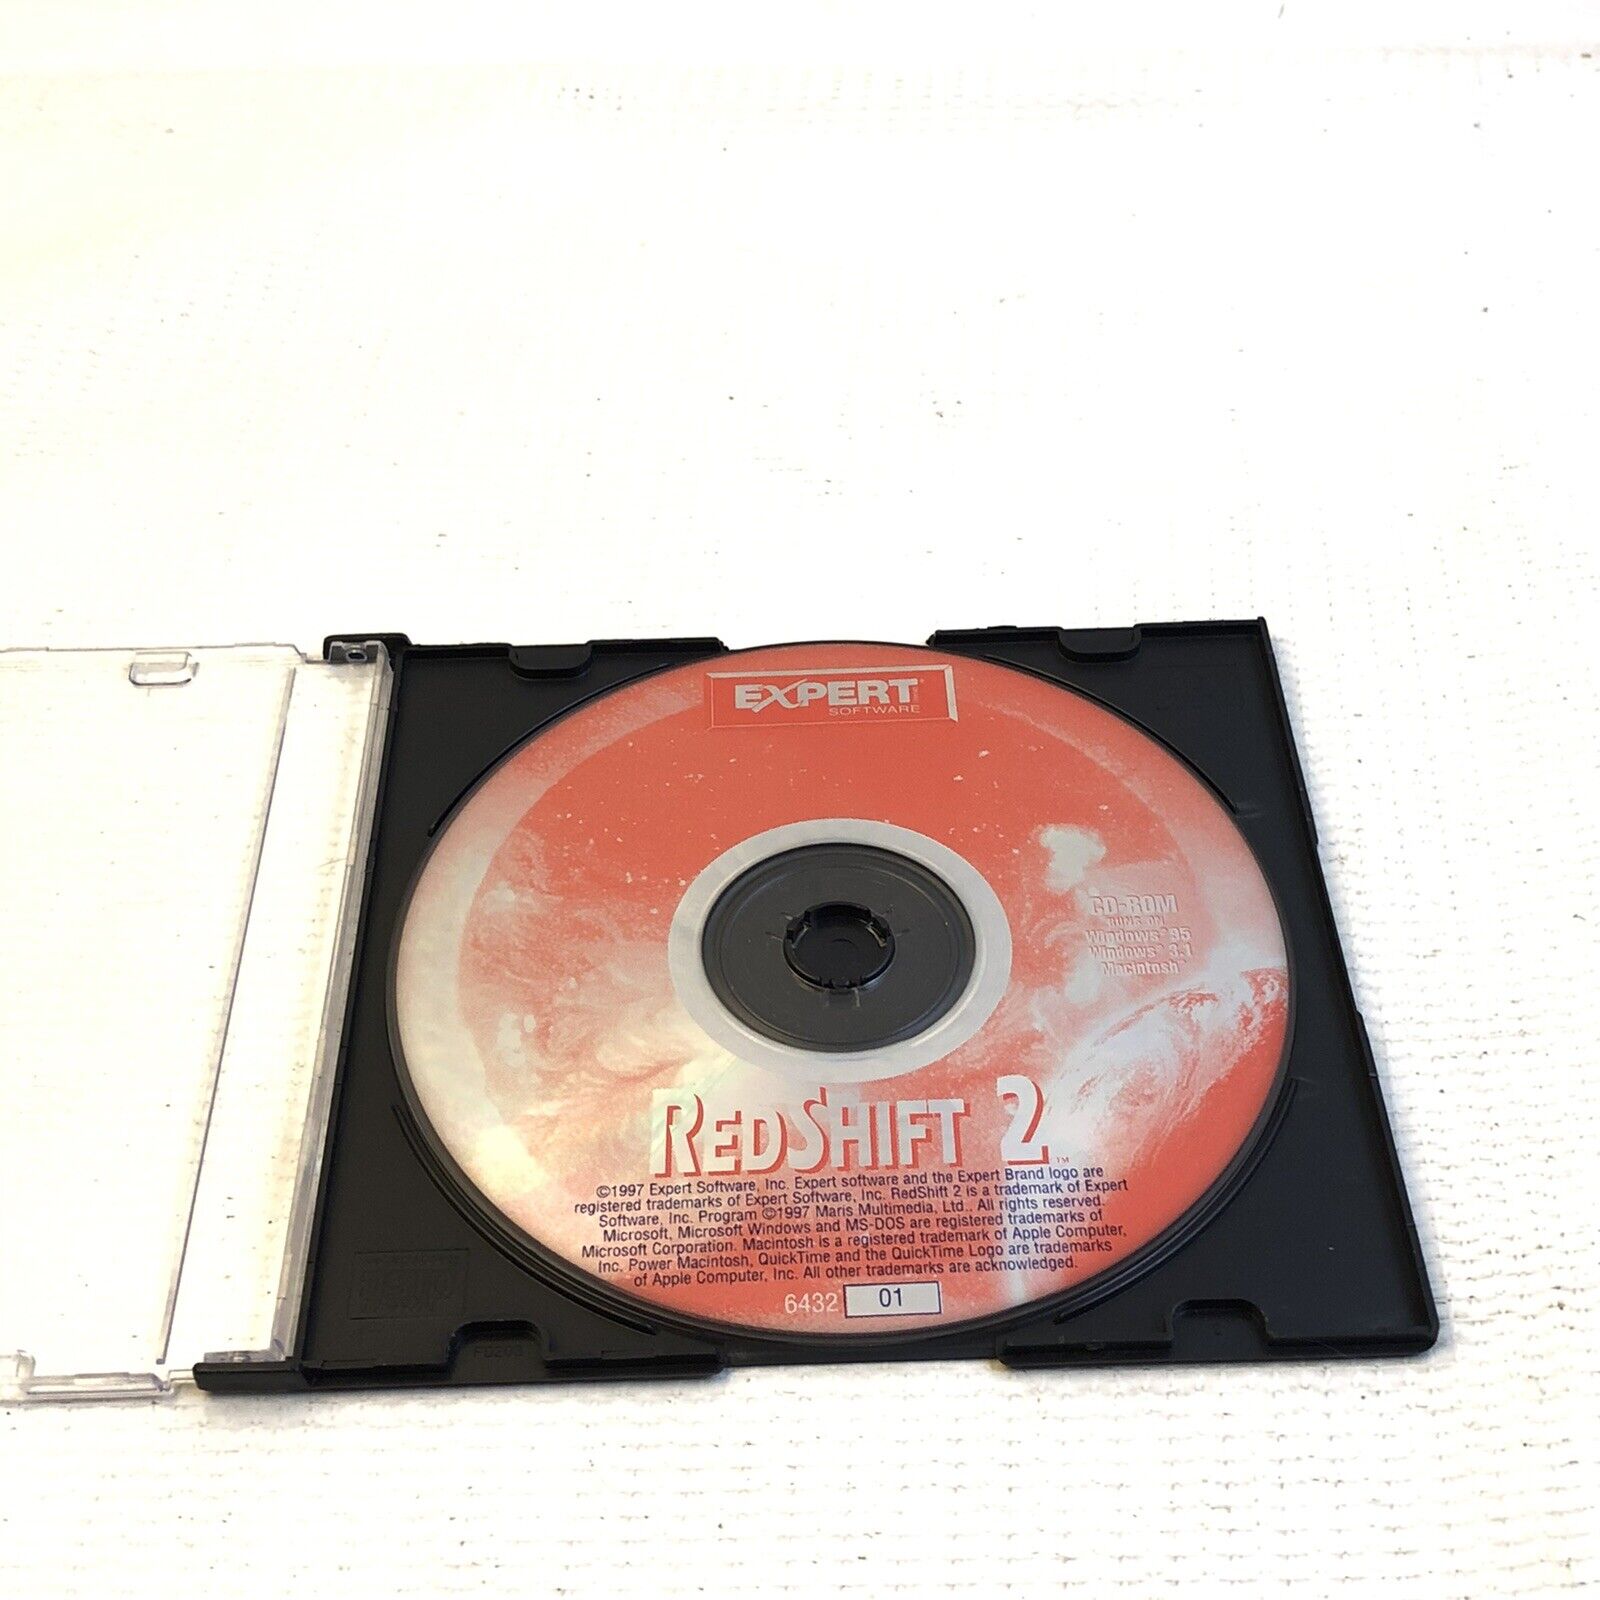 Redshift 2 PC 1997 CDROM Expert Software Multimedia Interactive Universe Space